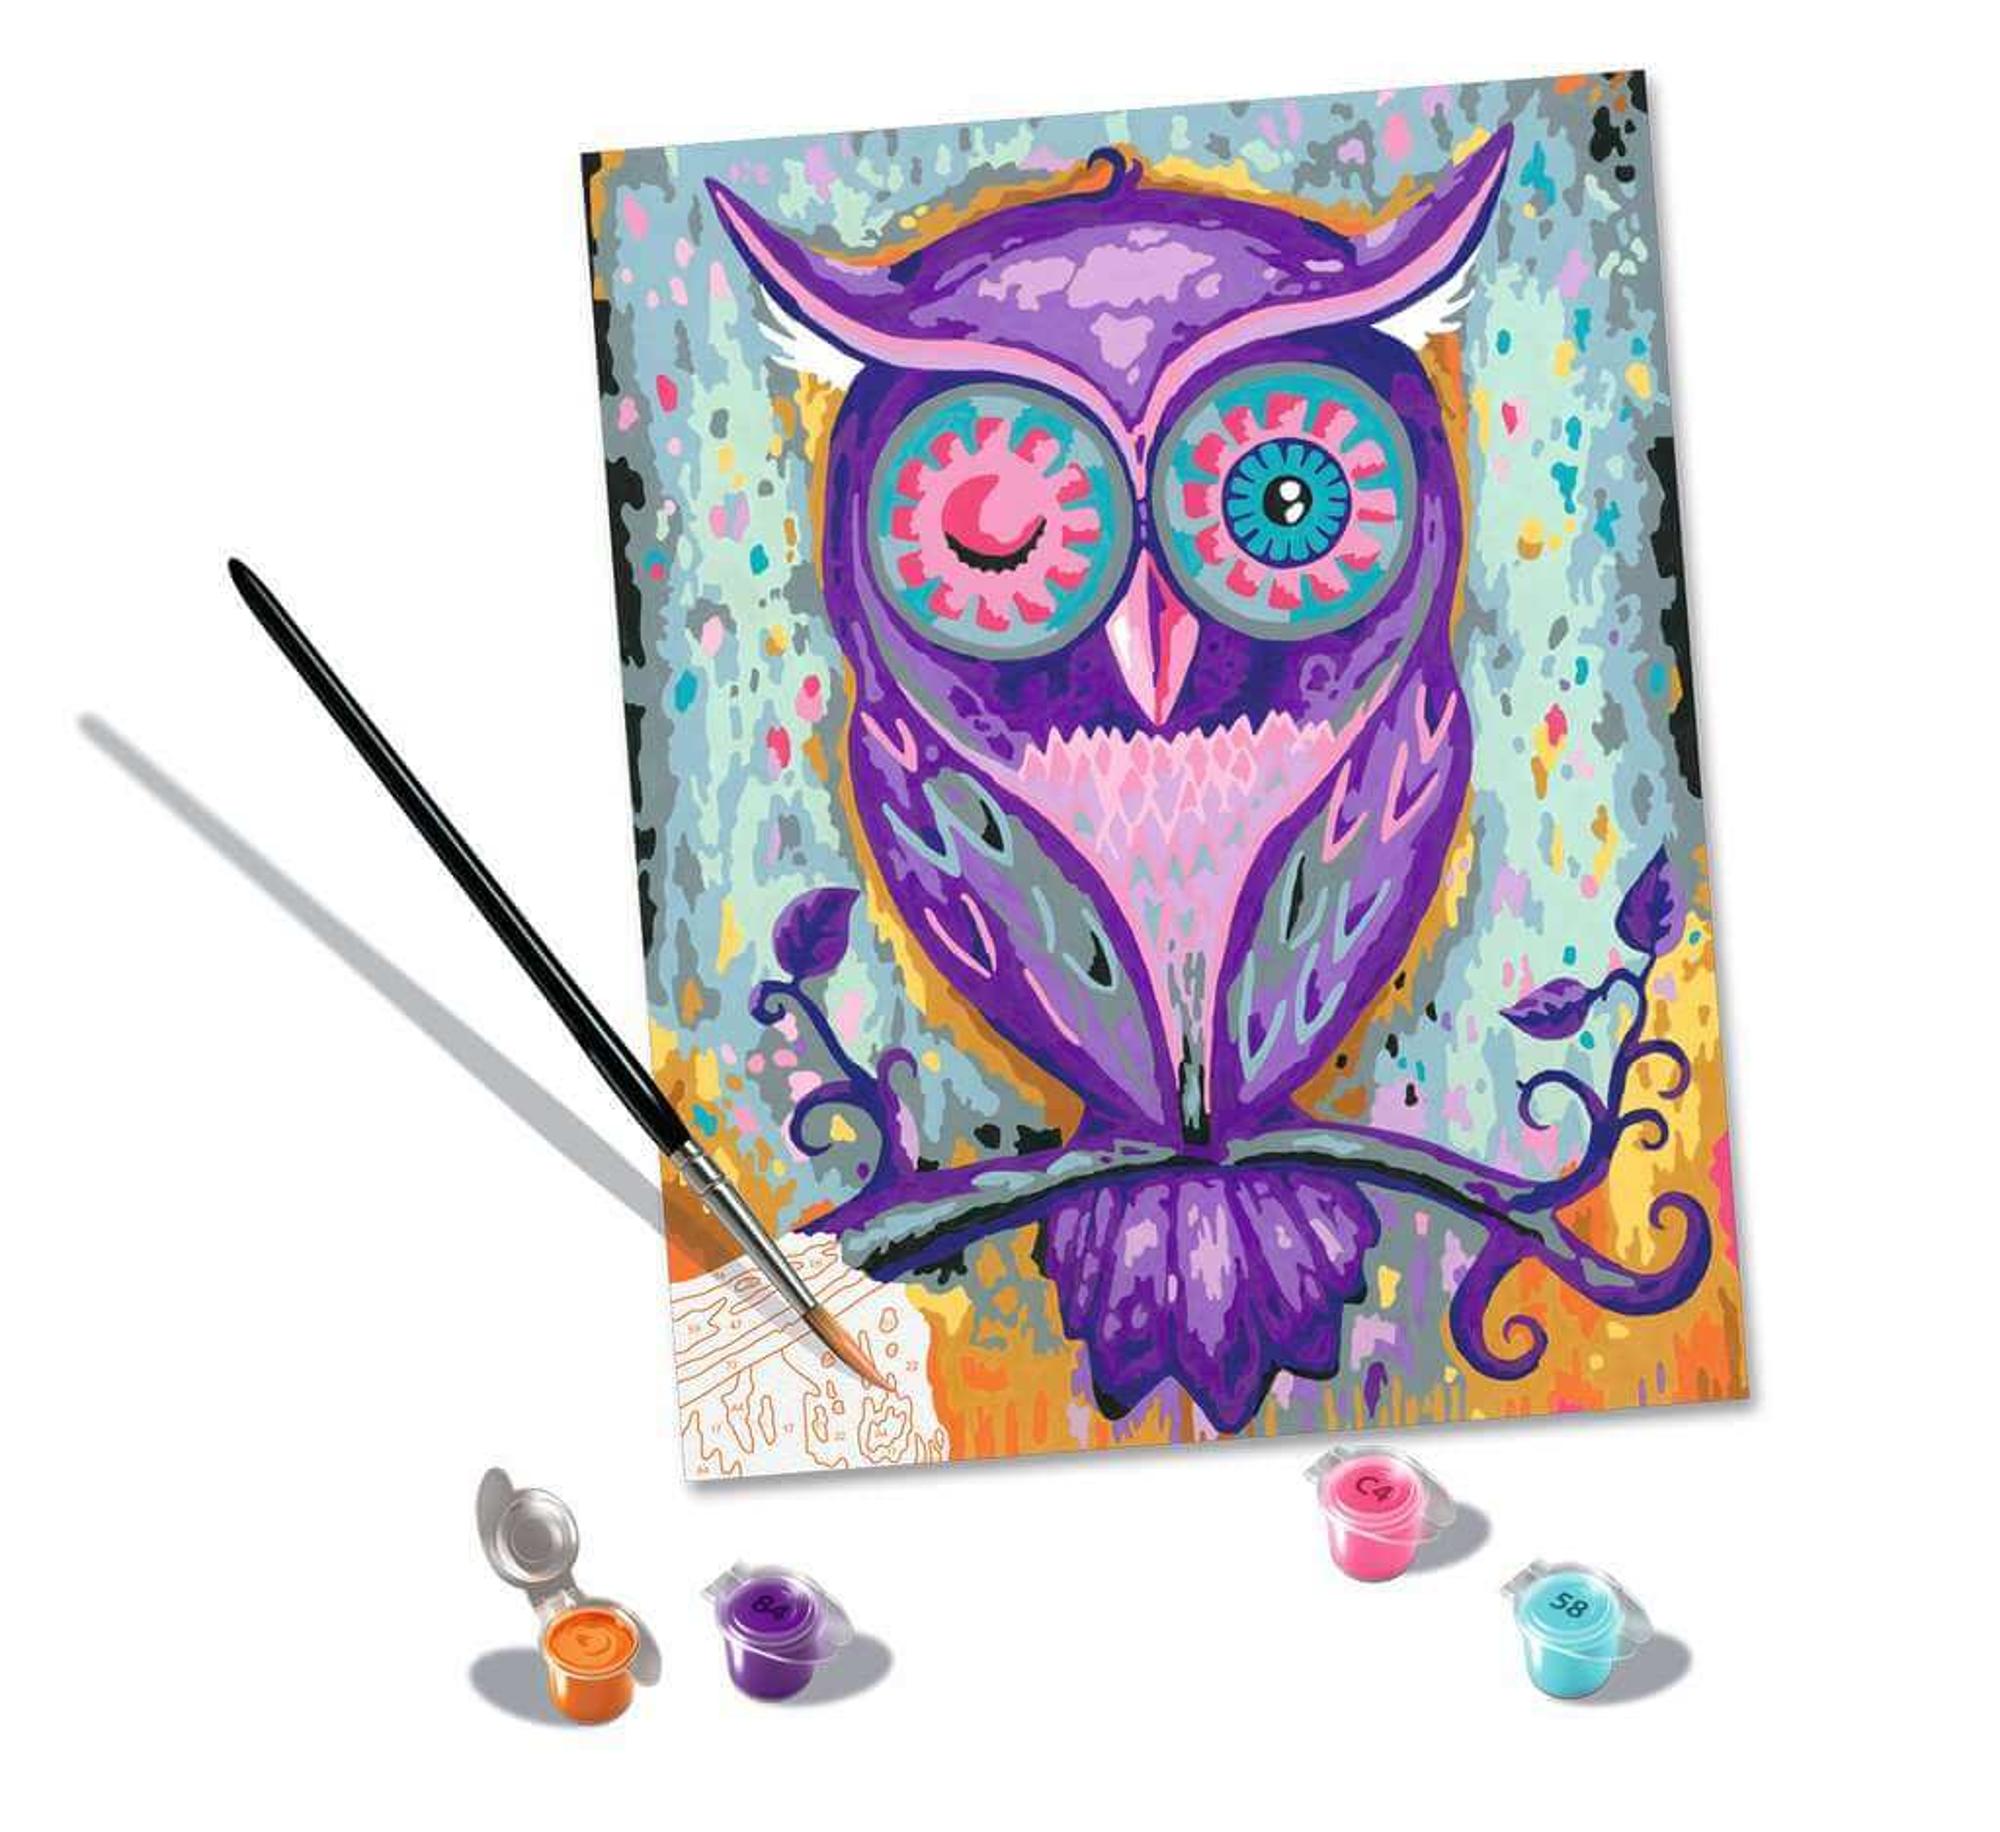 Ravensburger CreArt Dreaming Owl Paint-by-Number (10x12)